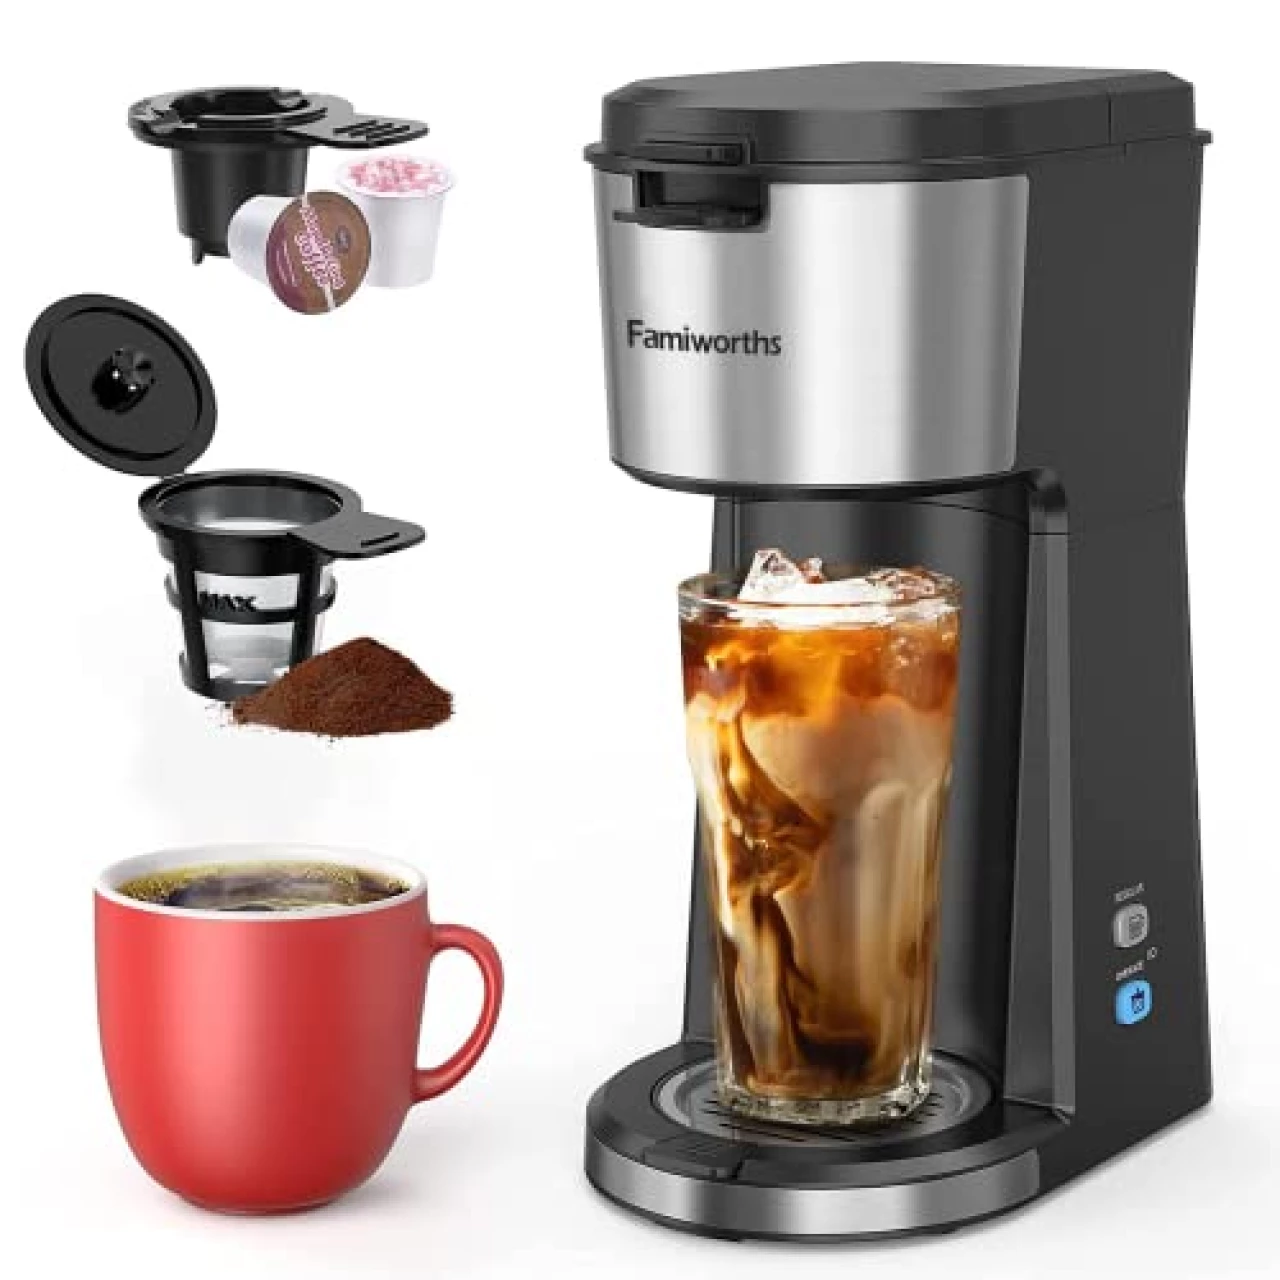 Famiworths Iced Coffee Maker, Hot and Cold Coffee Maker Single Serve for K Cup and Ground